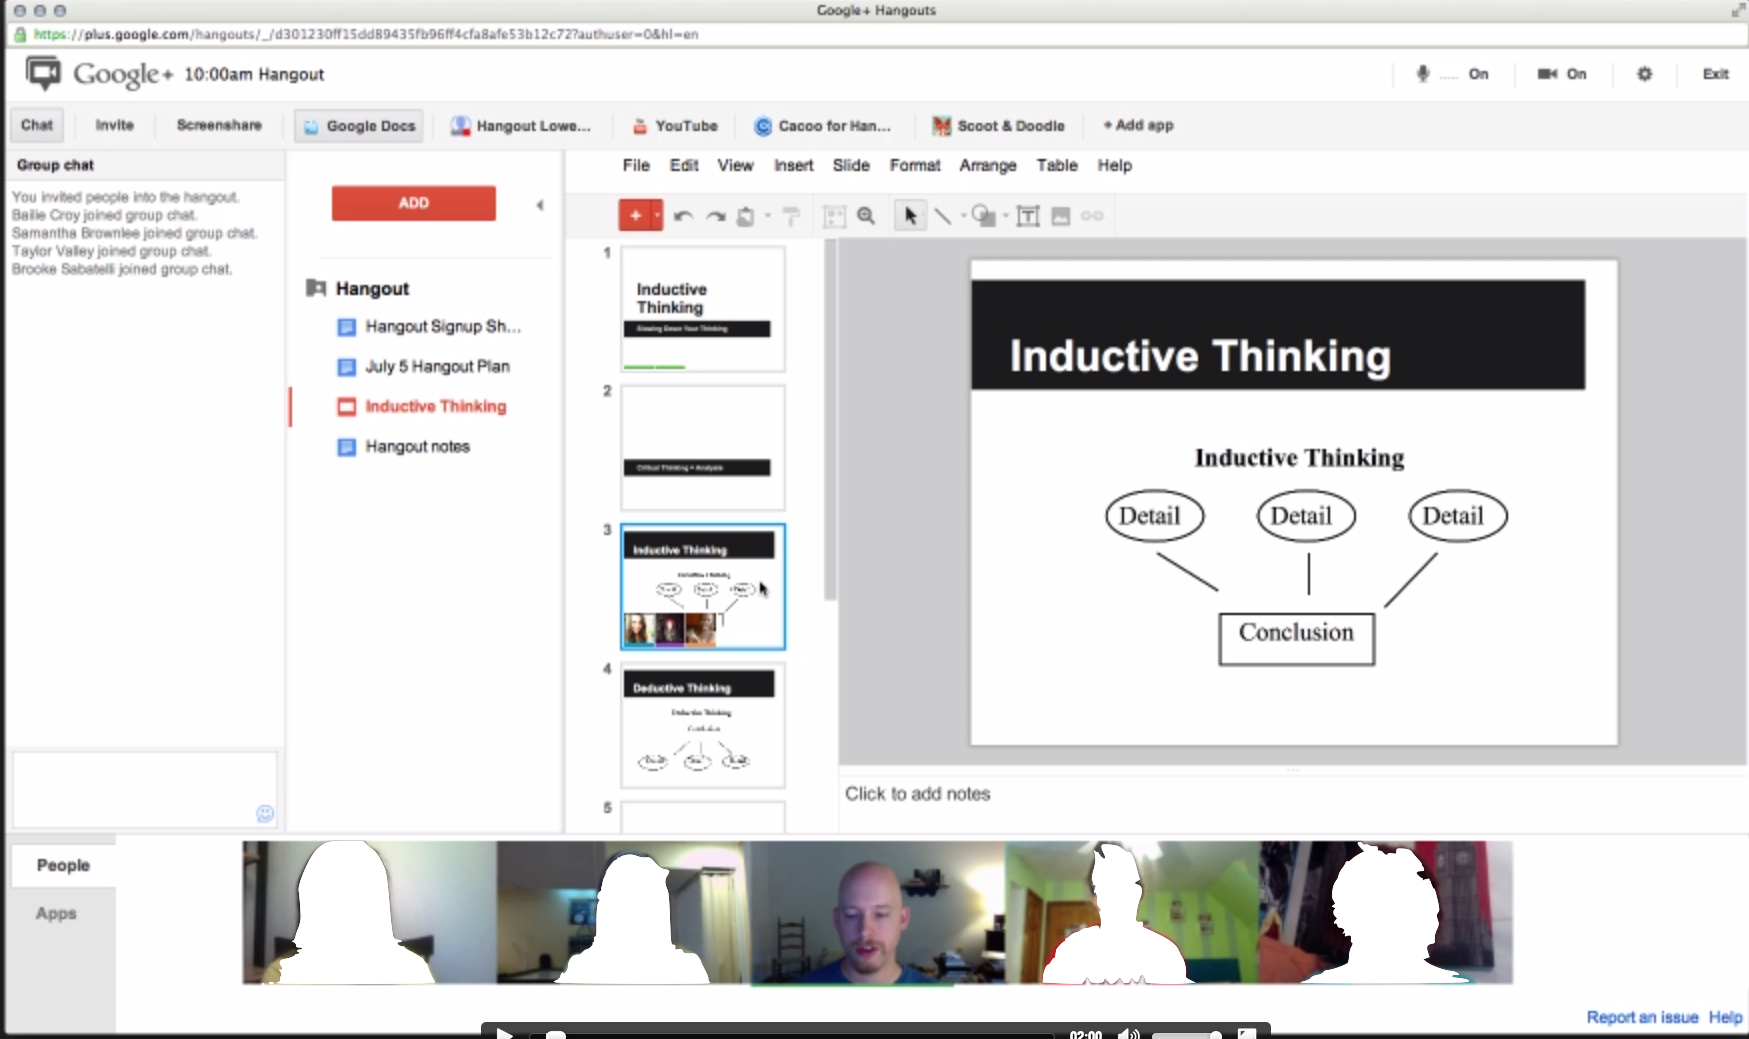 blurred screenshot of Google Hangout showing participants and slide being discussed